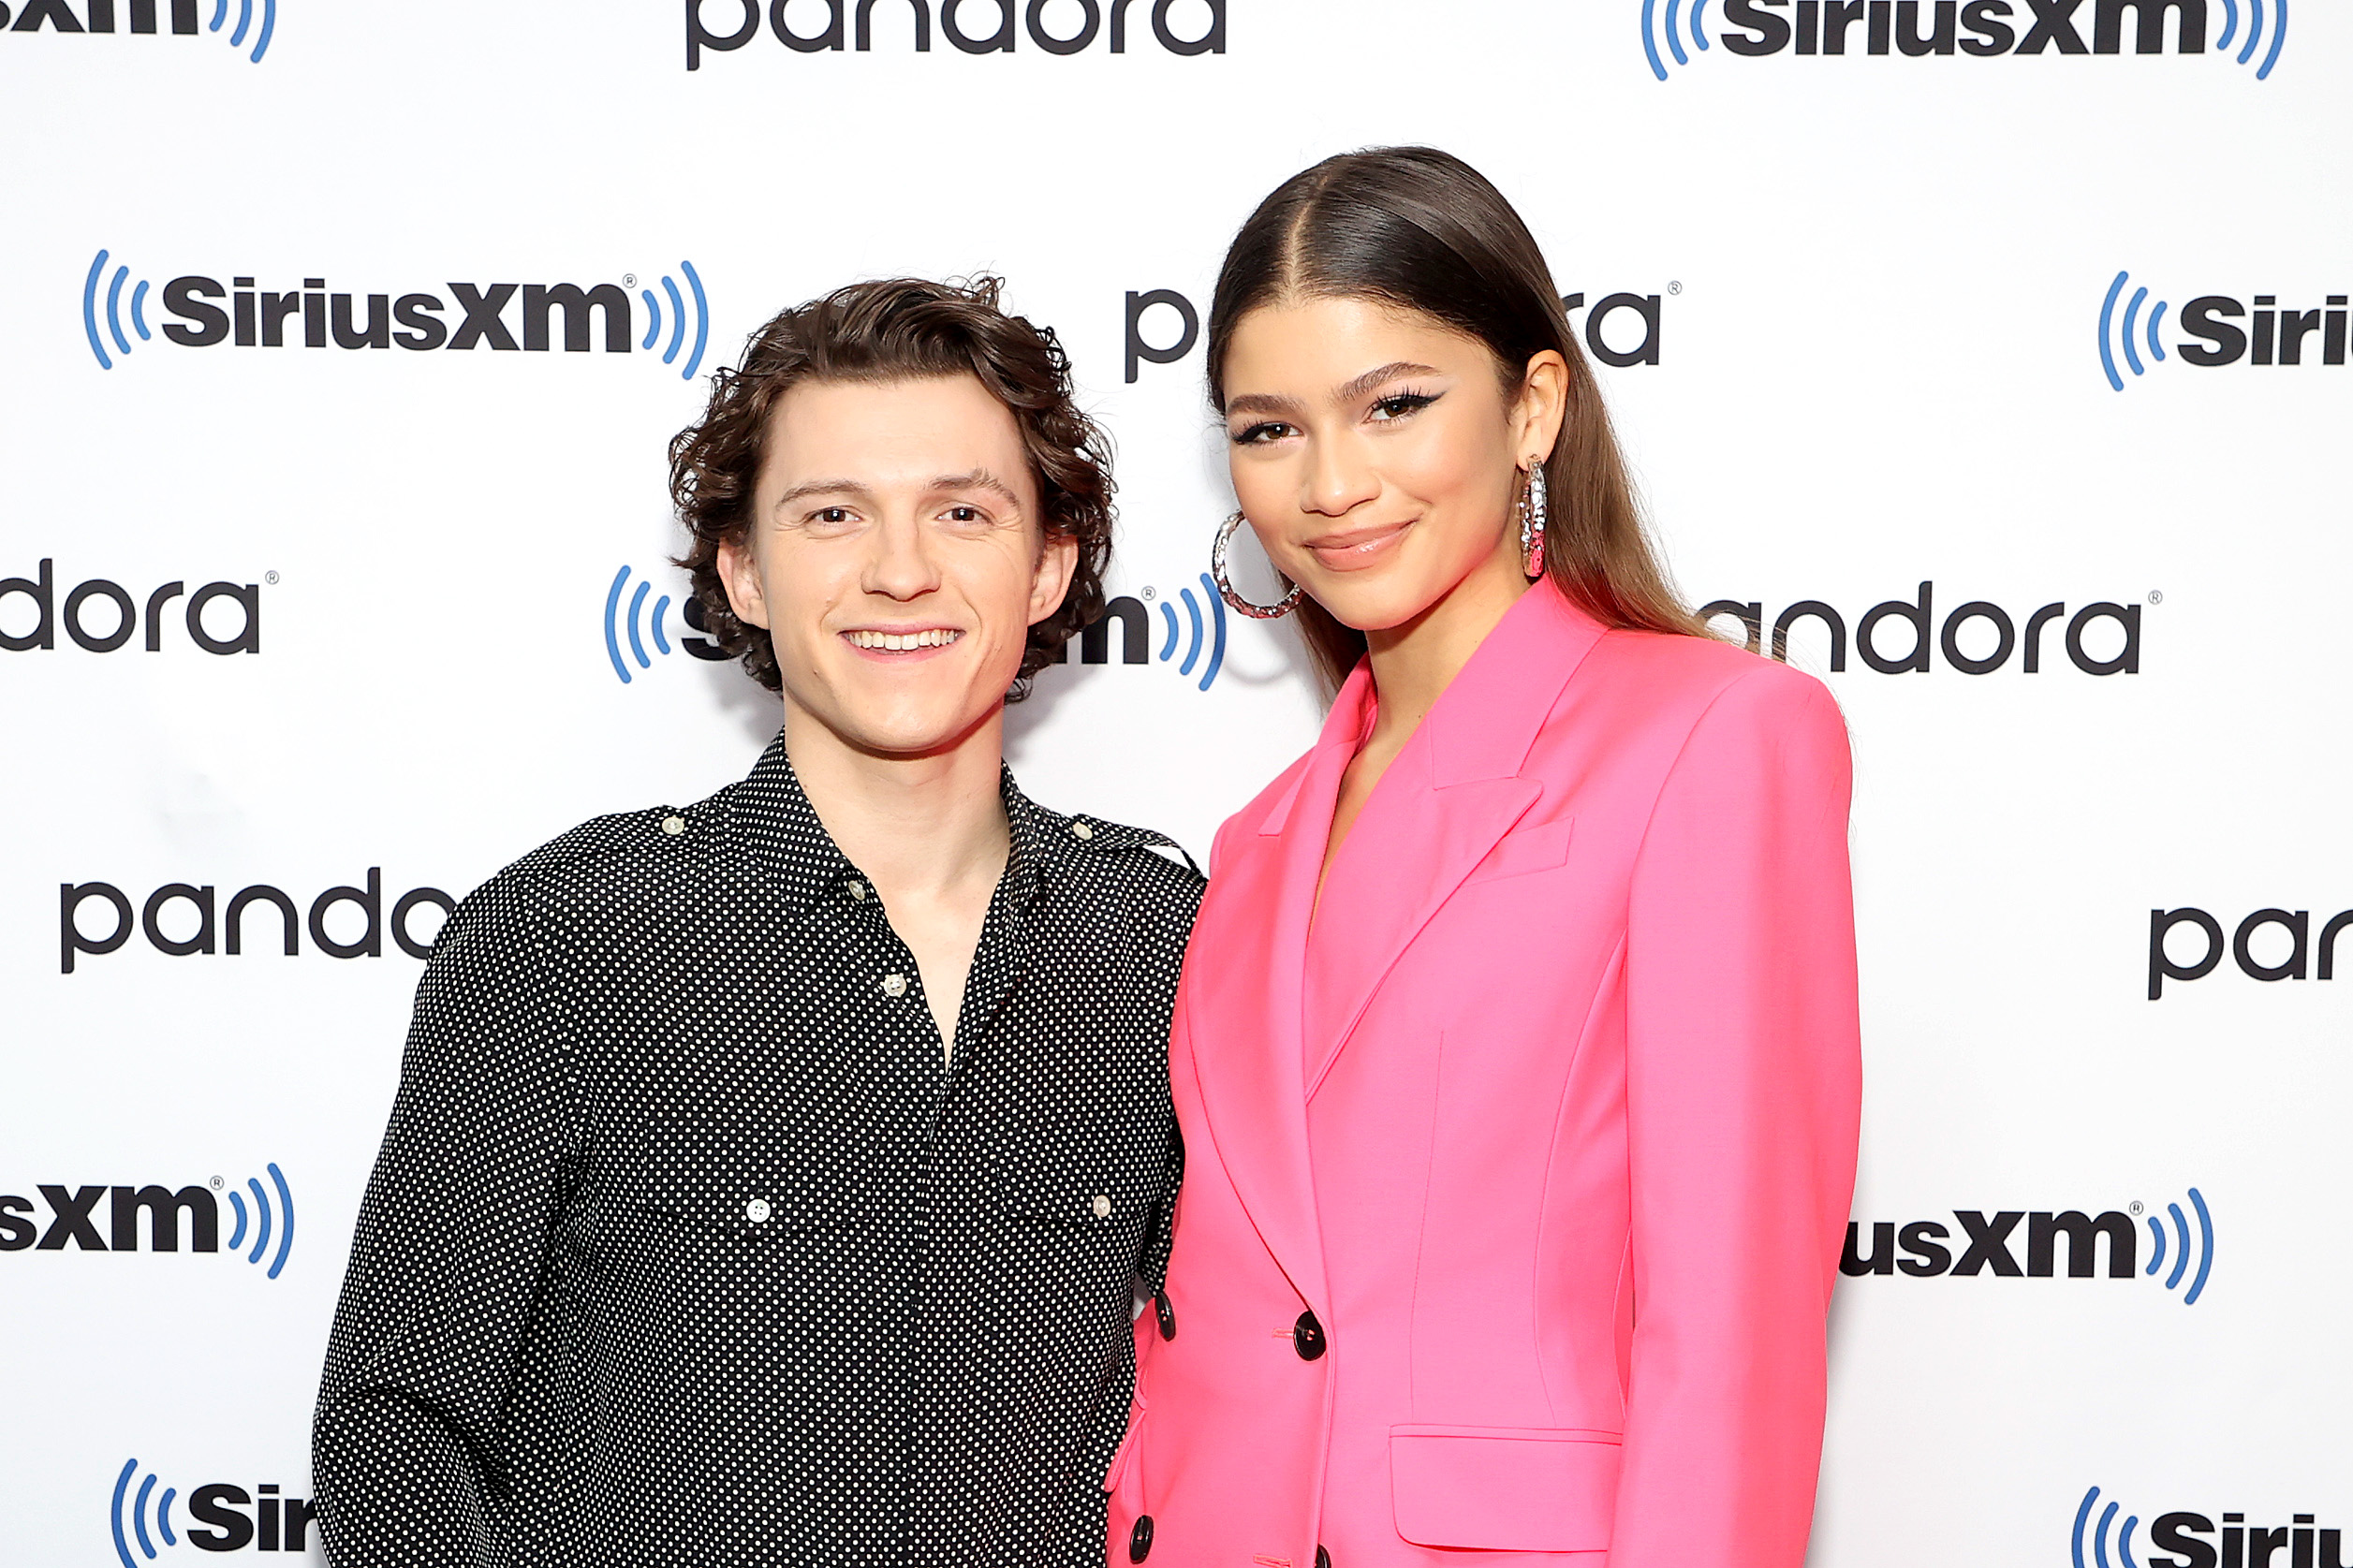 Zendaya and Tom Holland Held Hands in His Pocket During Cute Boston  Shopping Date